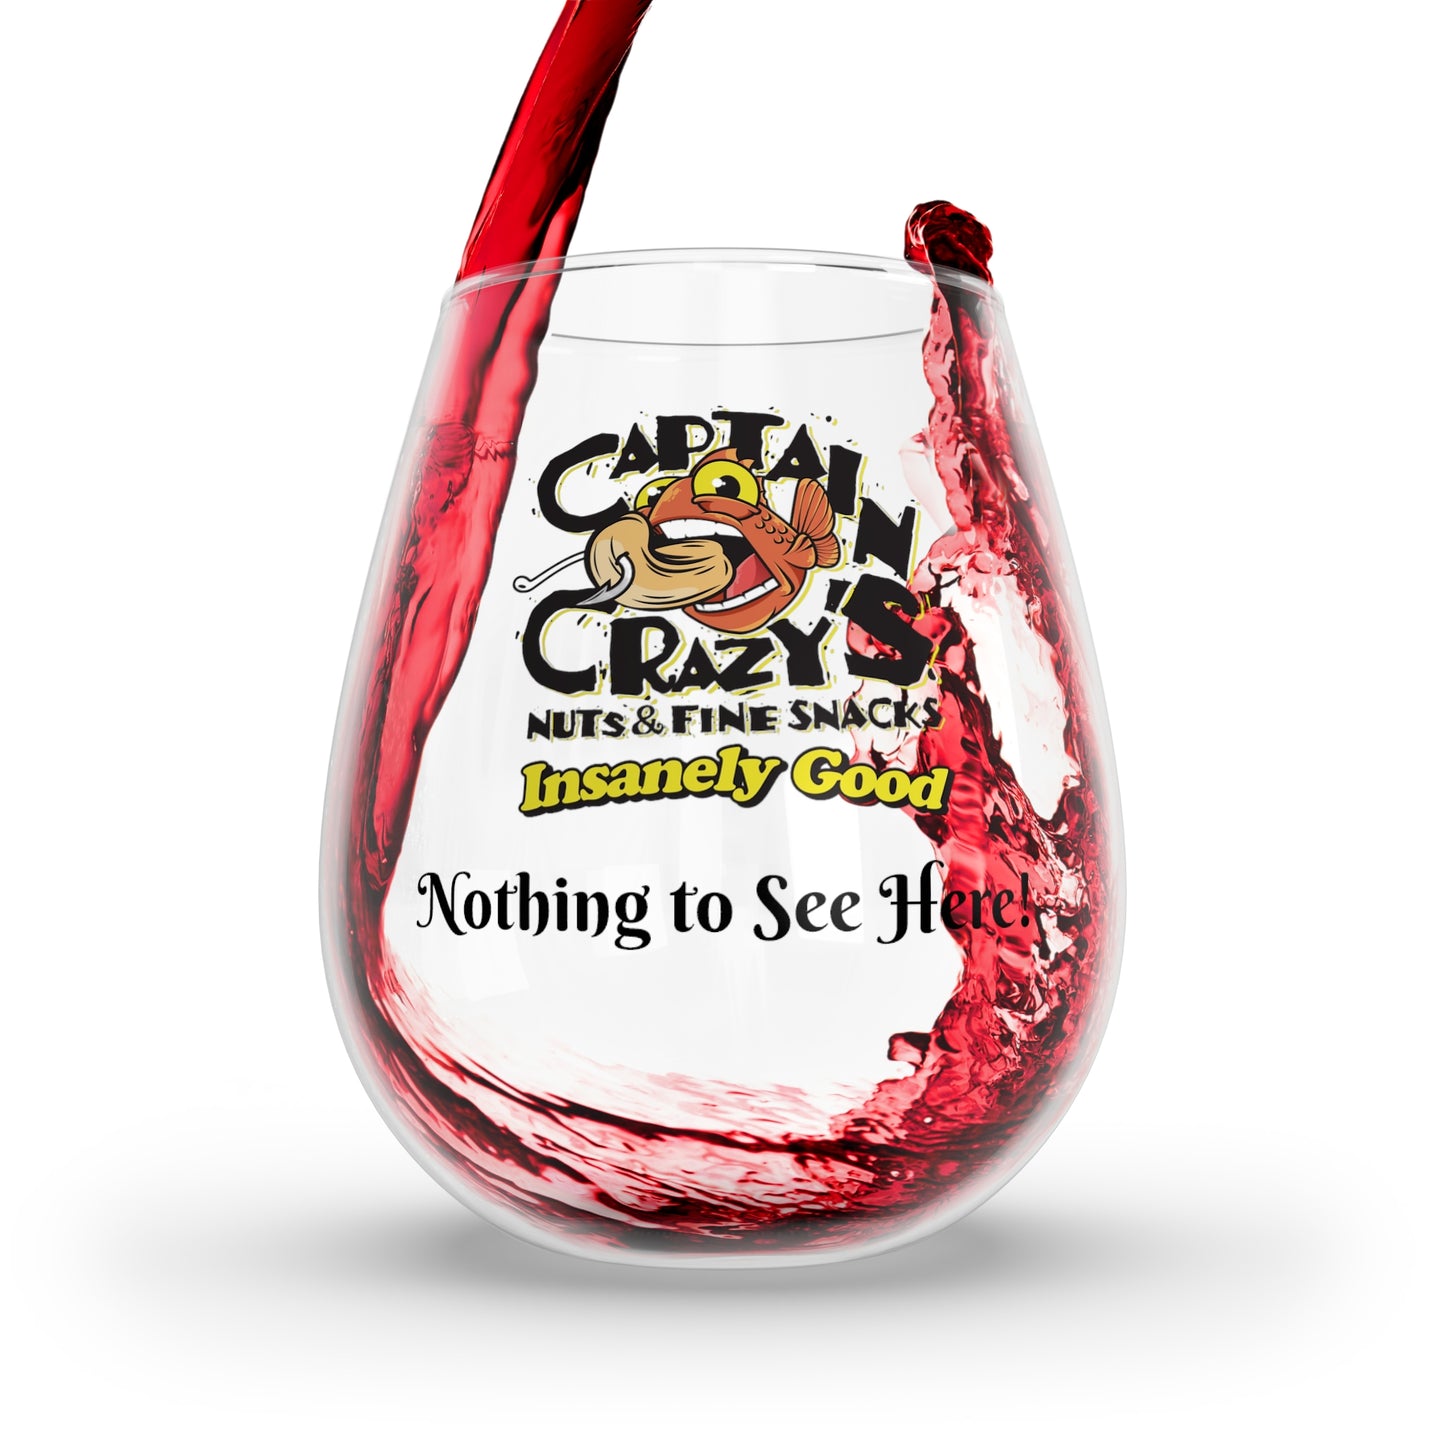 Captain Crazy's Stemless Wine Glass "Nothing to See Here!"